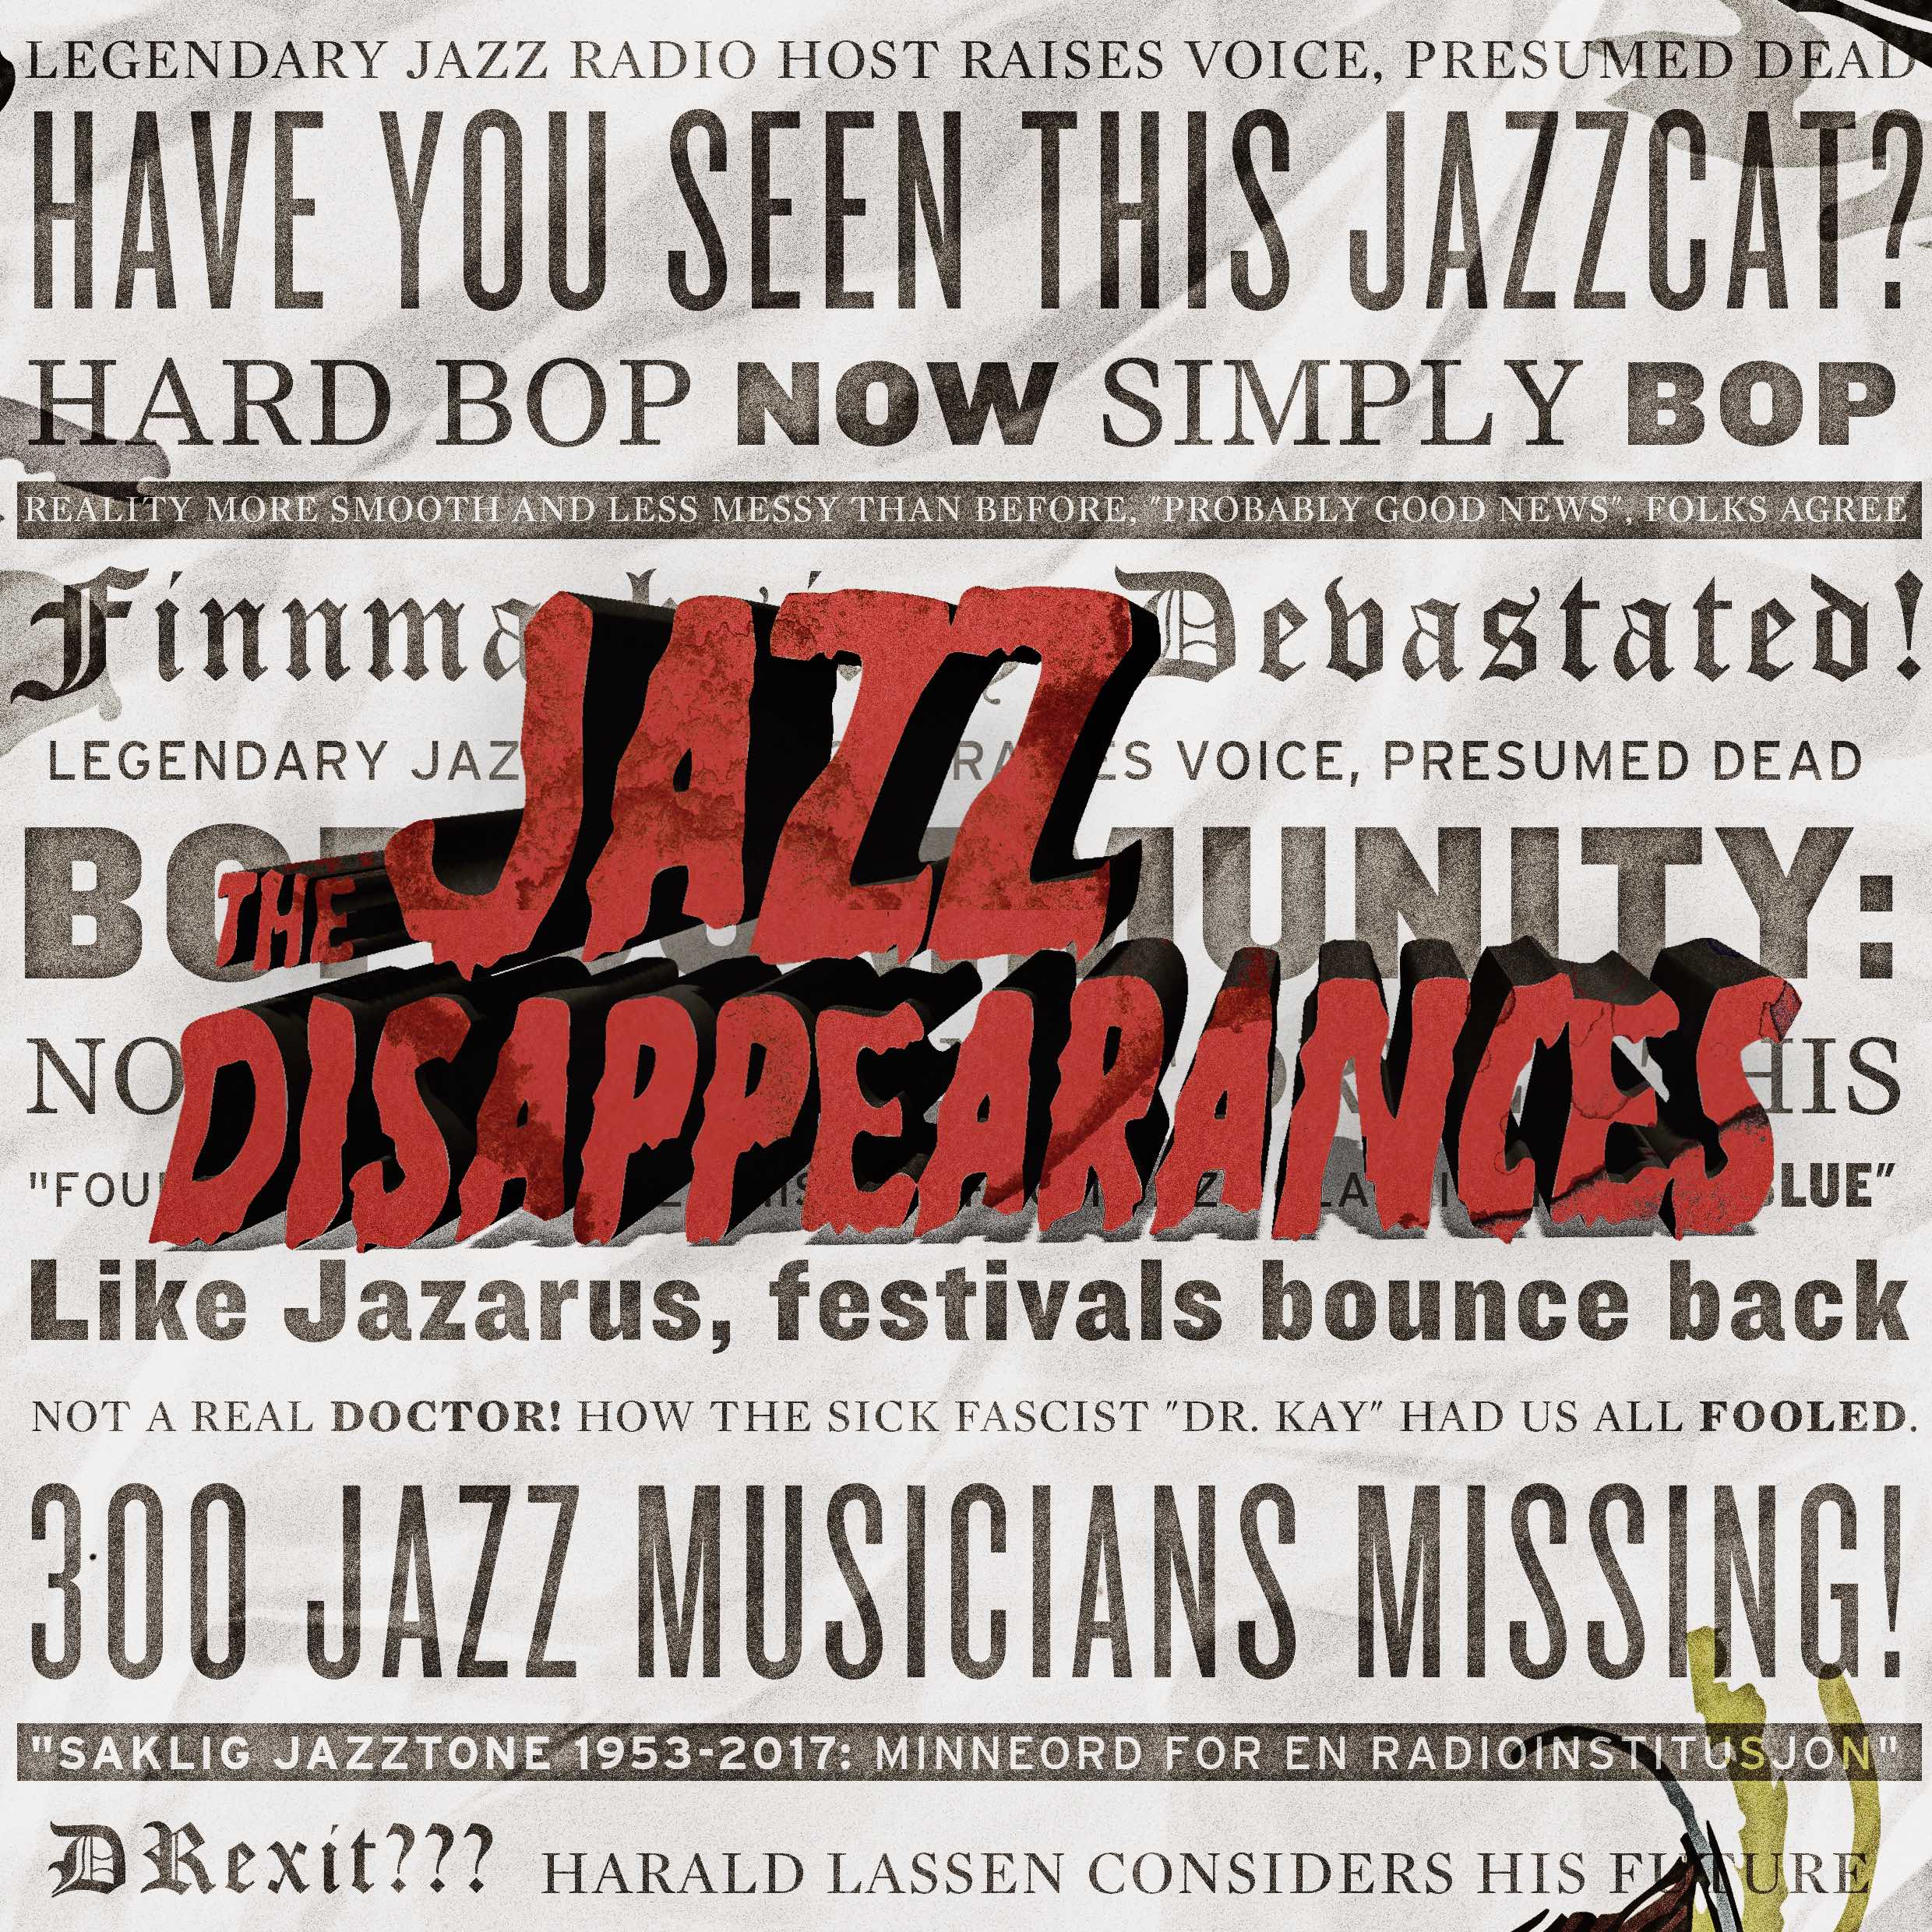 Episode 1: The Jazz Disappearances